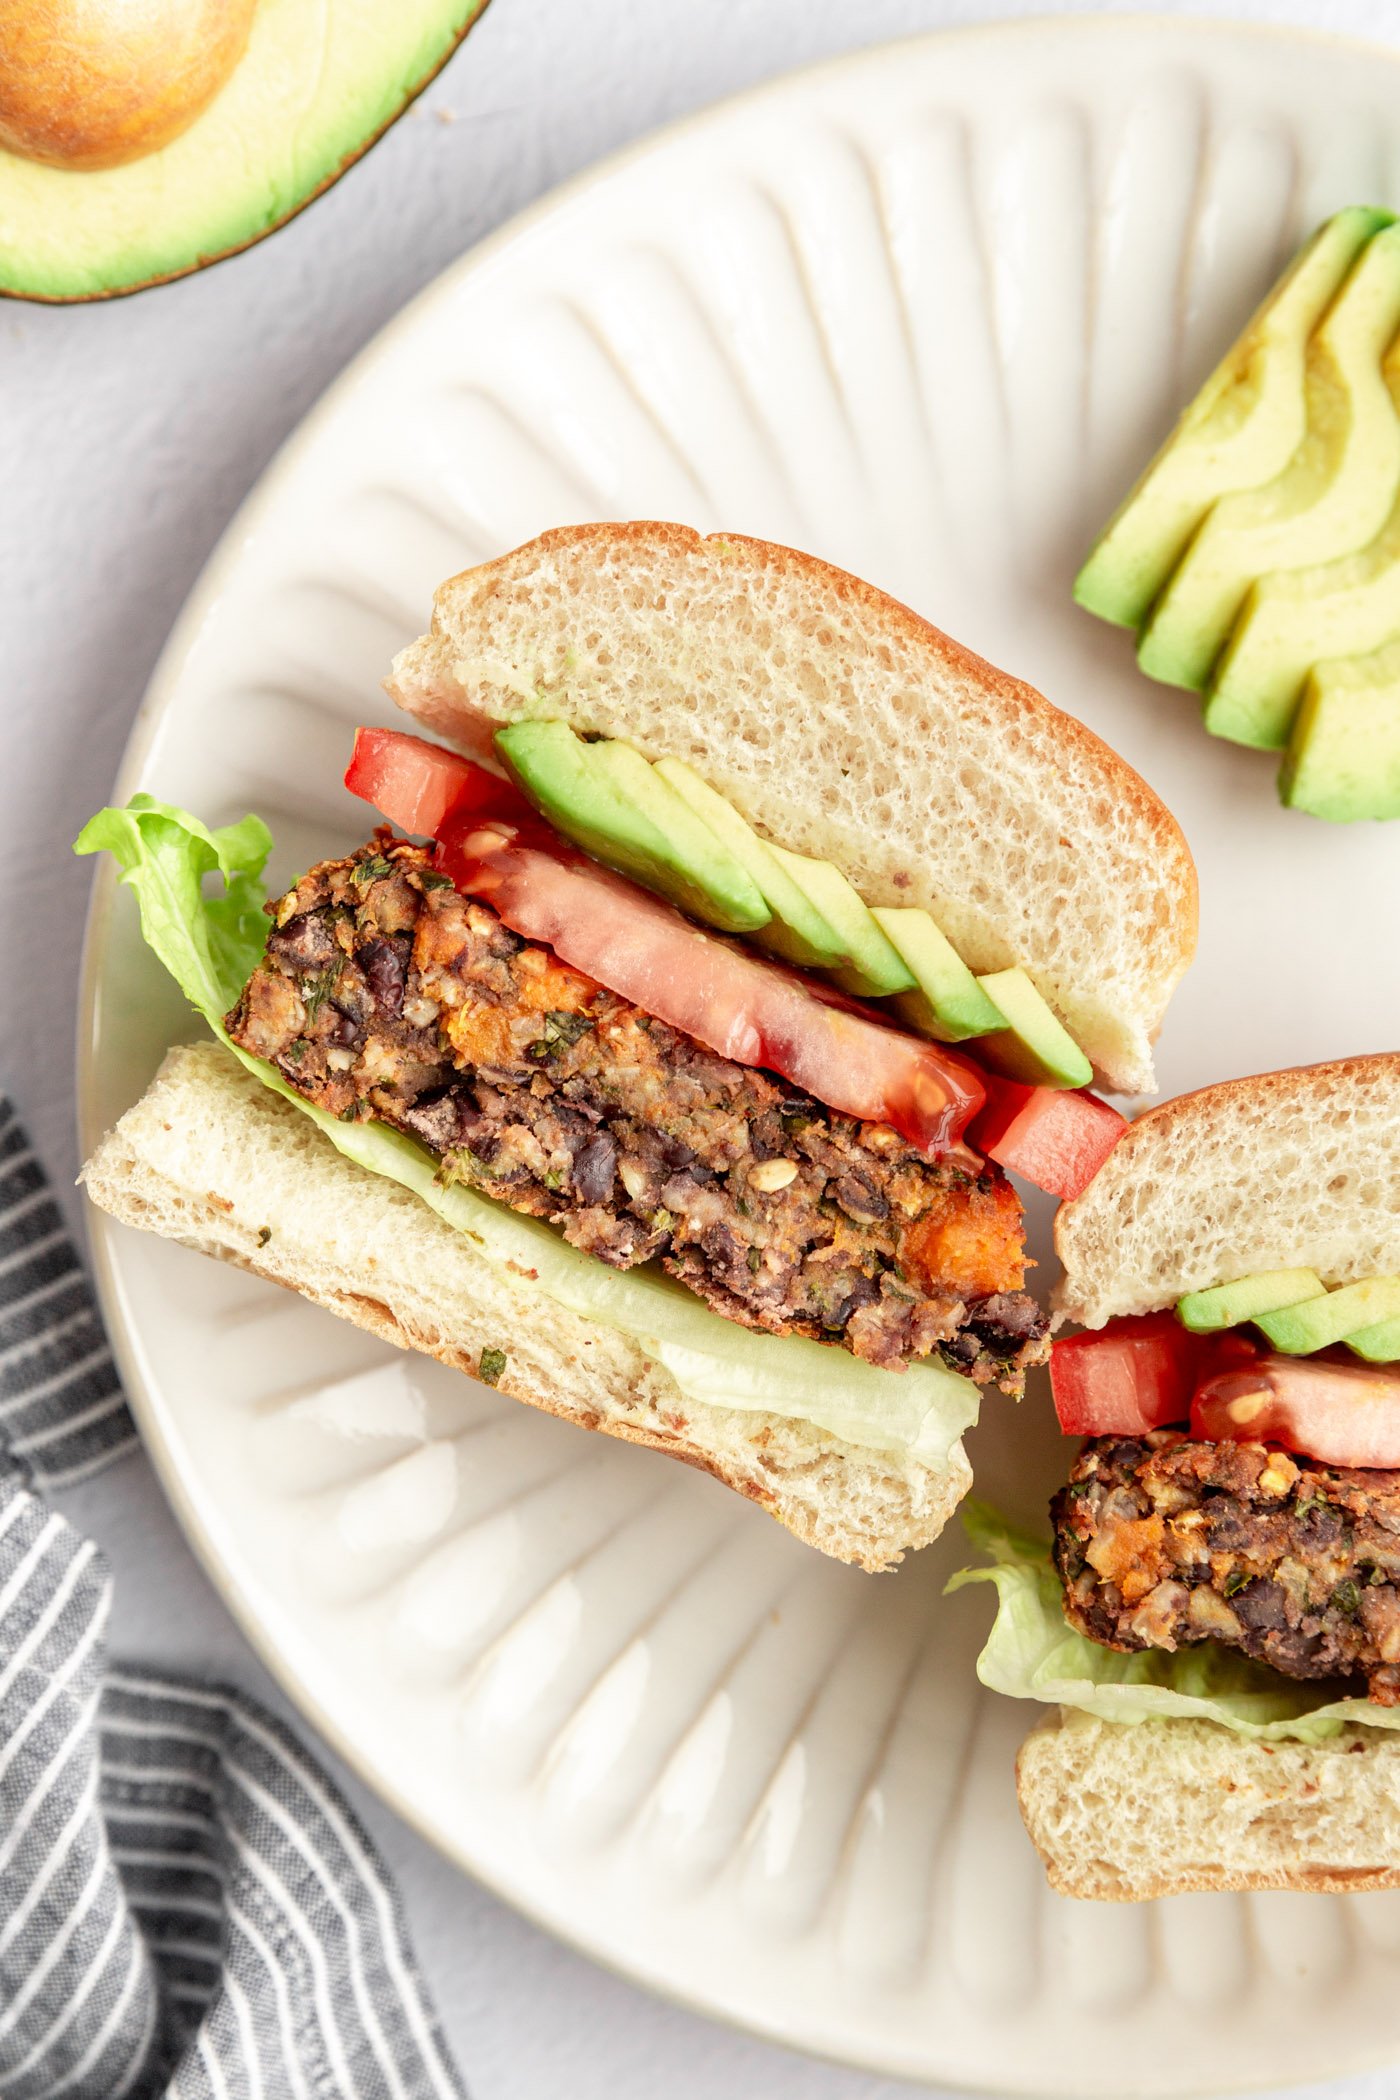 A black bean sweet potato burger on a bun with veggies sliced in half to show the inside texture and turned on its side on a white plate. There is sliced avocado on the plate with the burger.